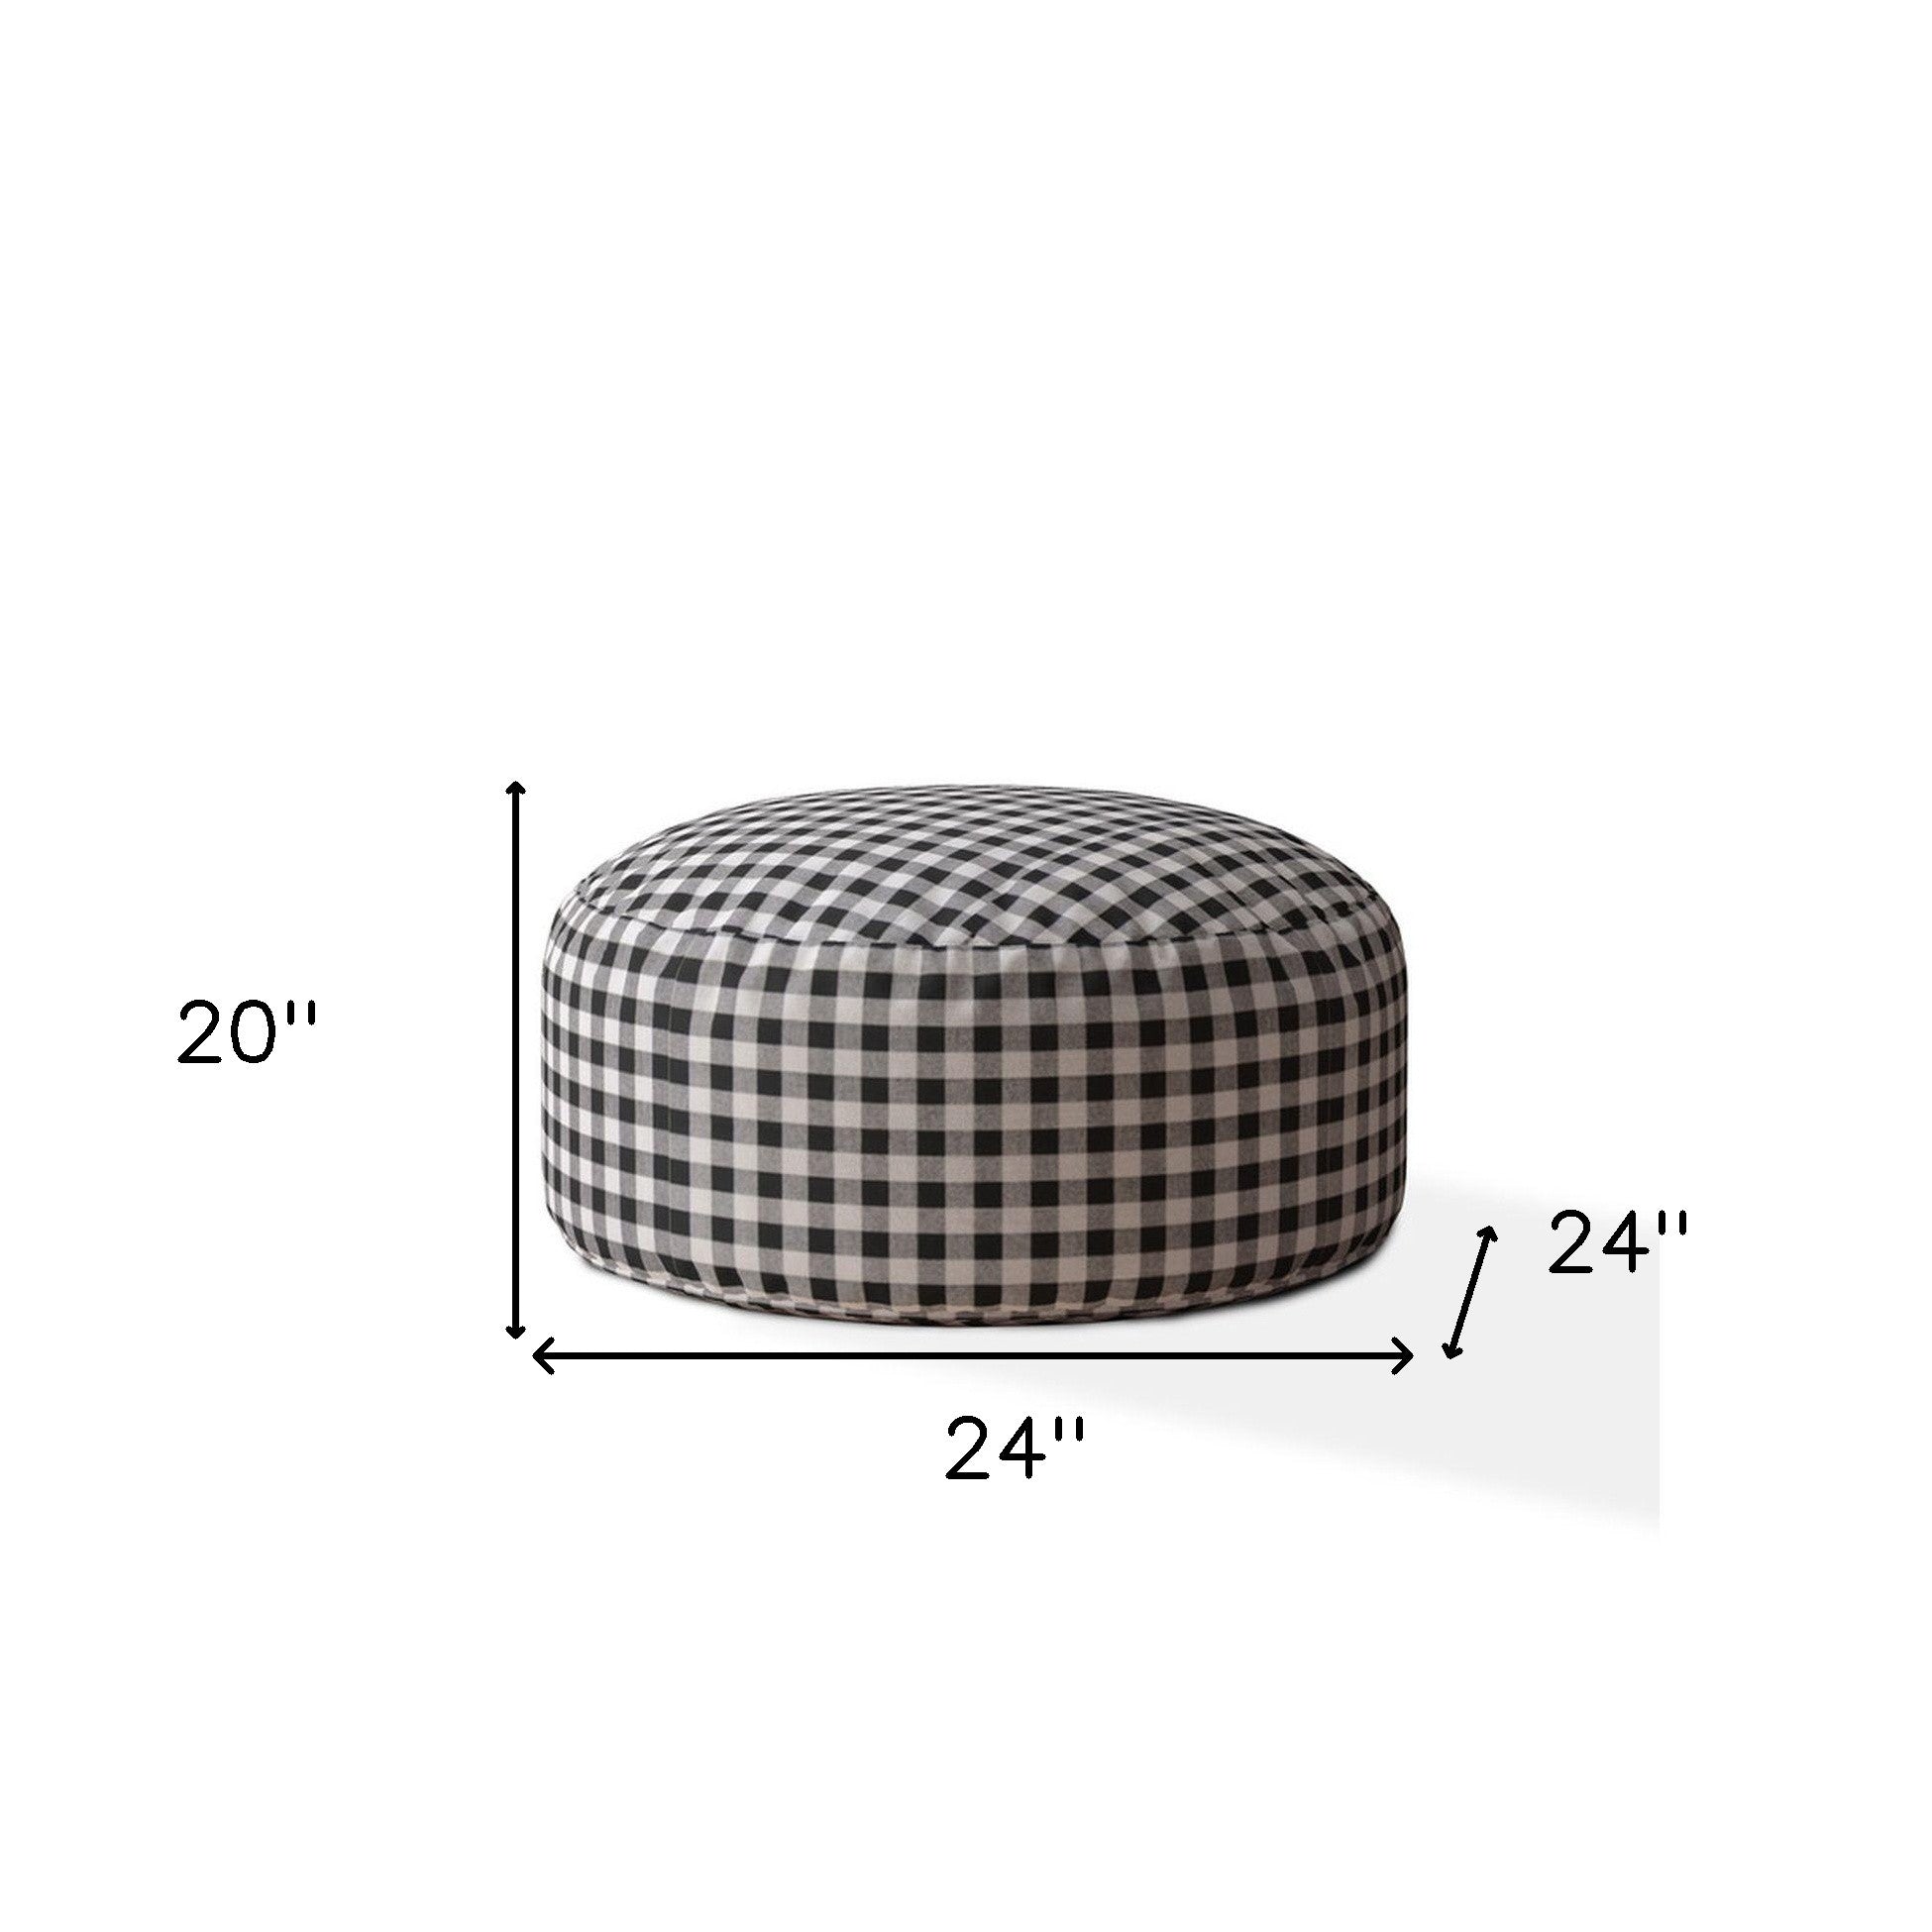 24" Black And Gray Cotton Round Gingham Pouf Cover